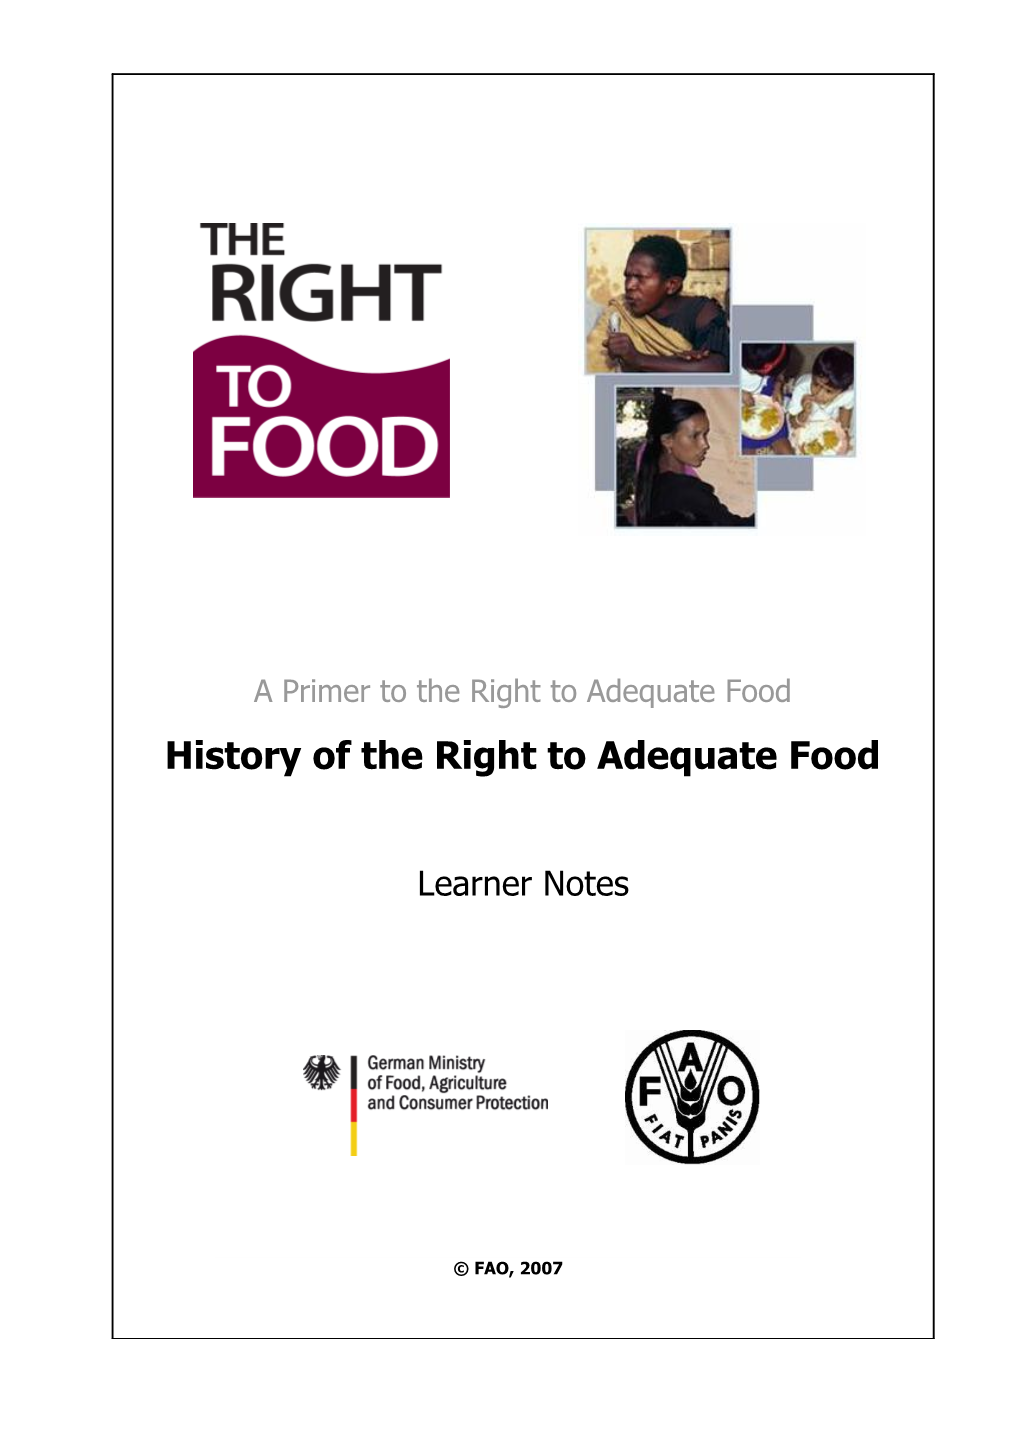 A Primer to the Right to Adequate Food